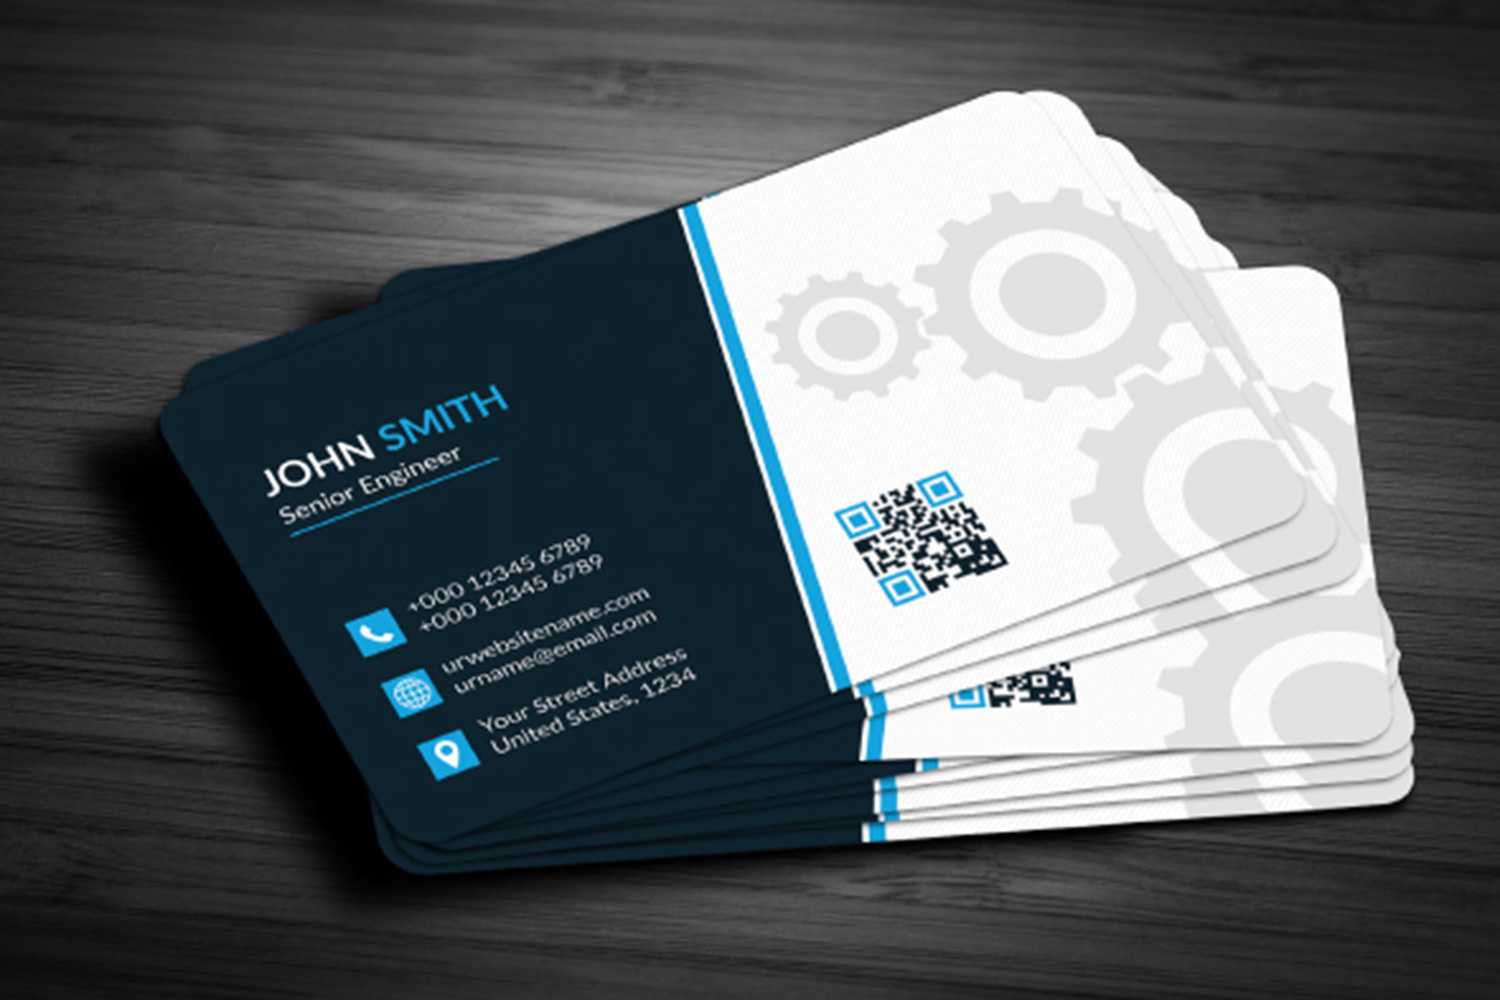 009 Business Card Template Free Download Ideas Archaicawful Throughout Free Bussiness Card Template